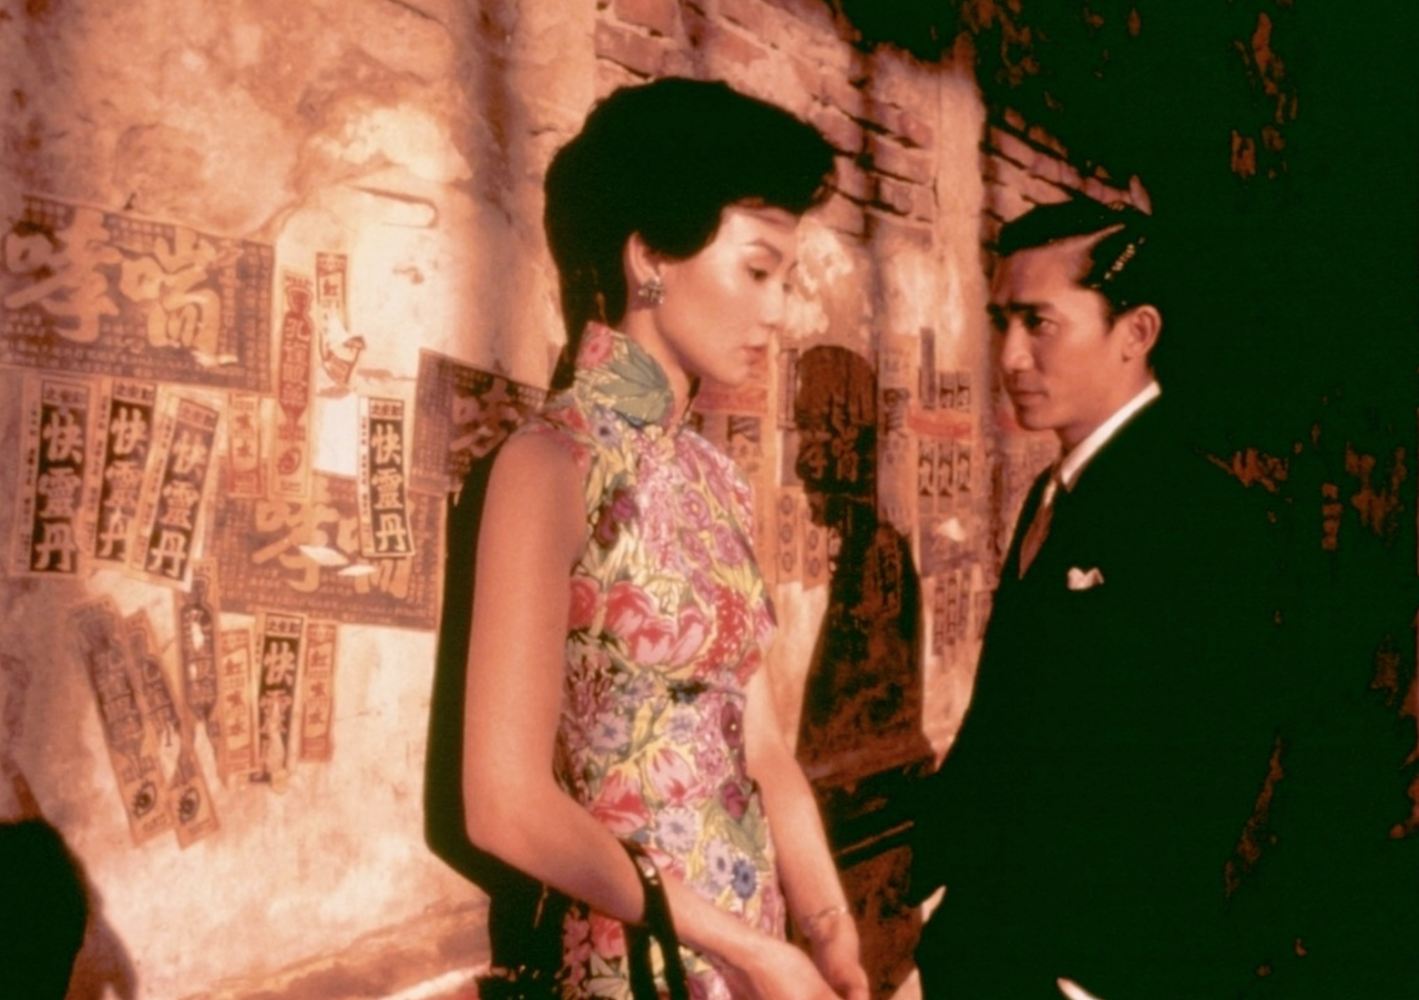 Following Foreign Film: “In the Mood for Love” – tjTODAY